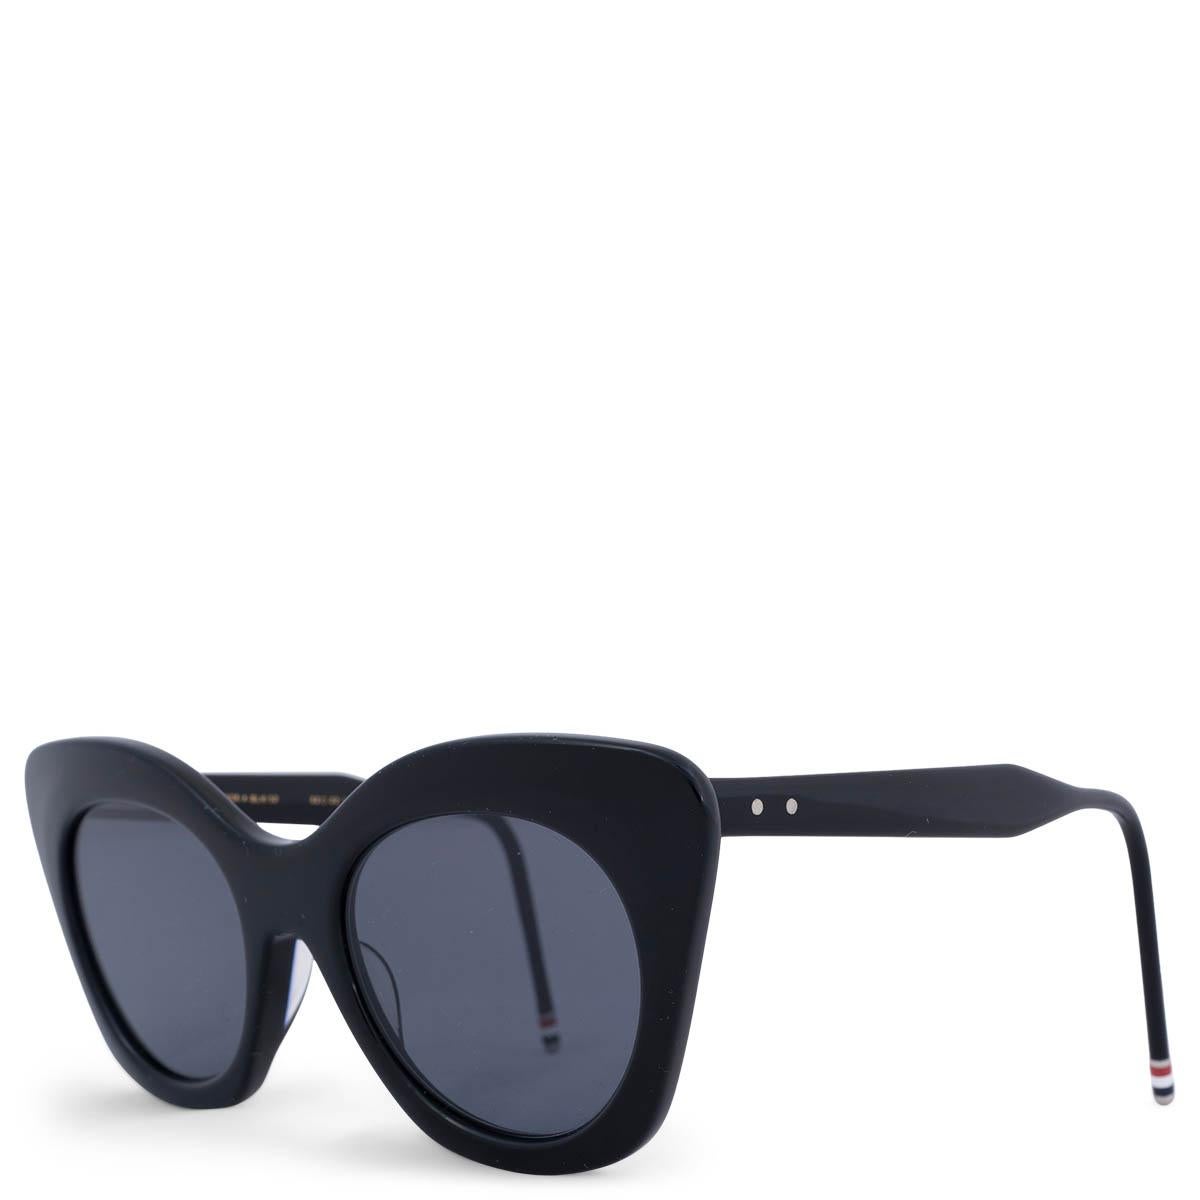 100% authentic Thom Browne TB508 cat-eye sunglasses in black acetate with dark grey lenses. Features signature tri-colore temple tips. Have been worn and are in excellent condition. No case.

Measurements
Model	TB 508-A-BLK-52
Width	15cm